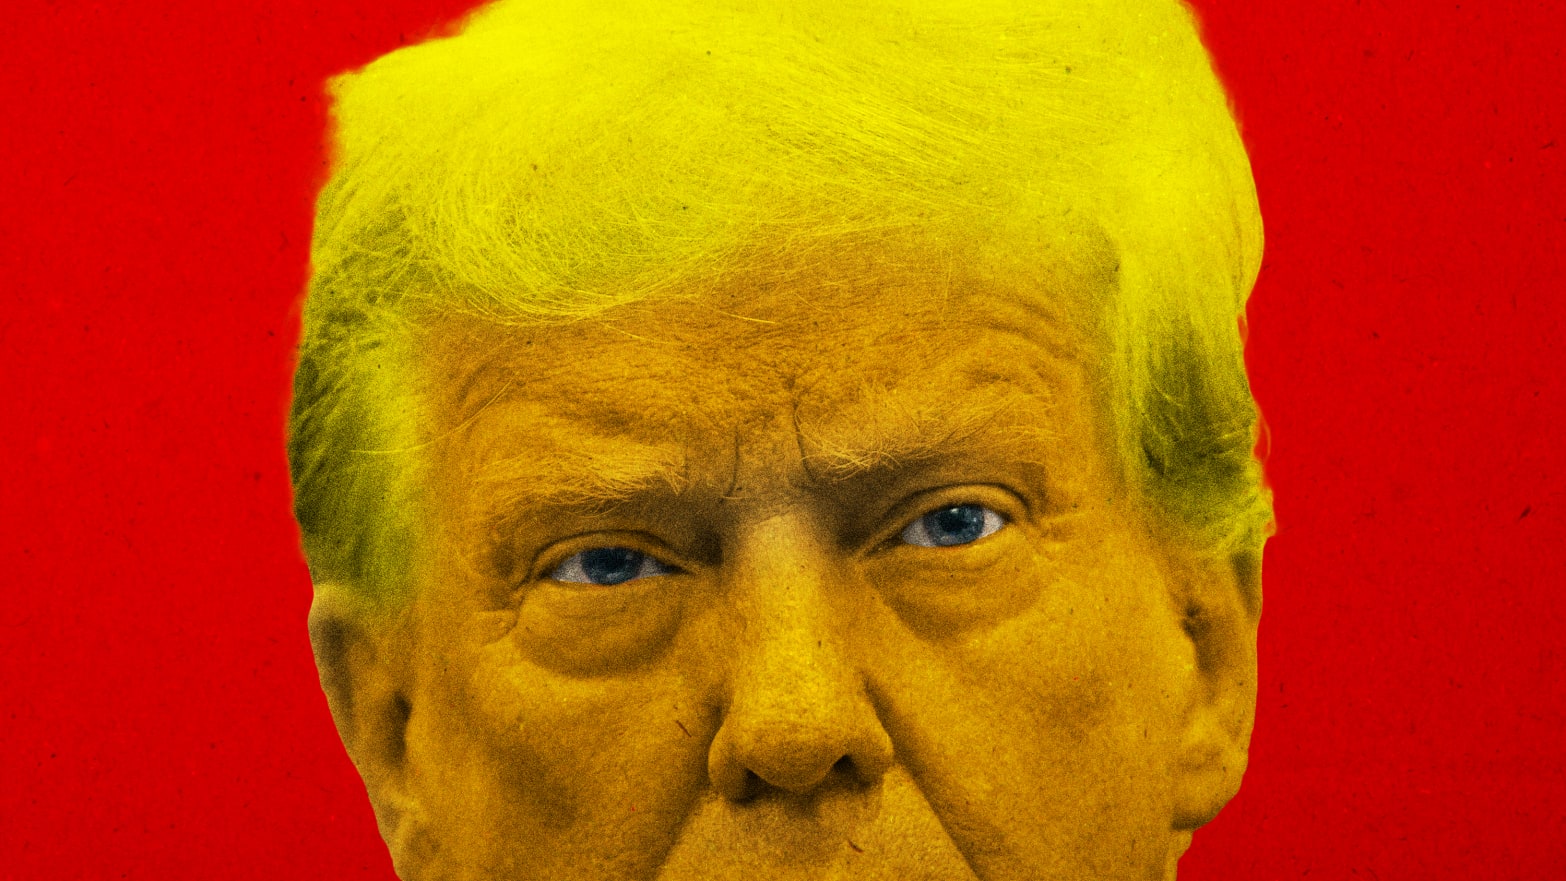 A photo illustration of former President Donald Trump.